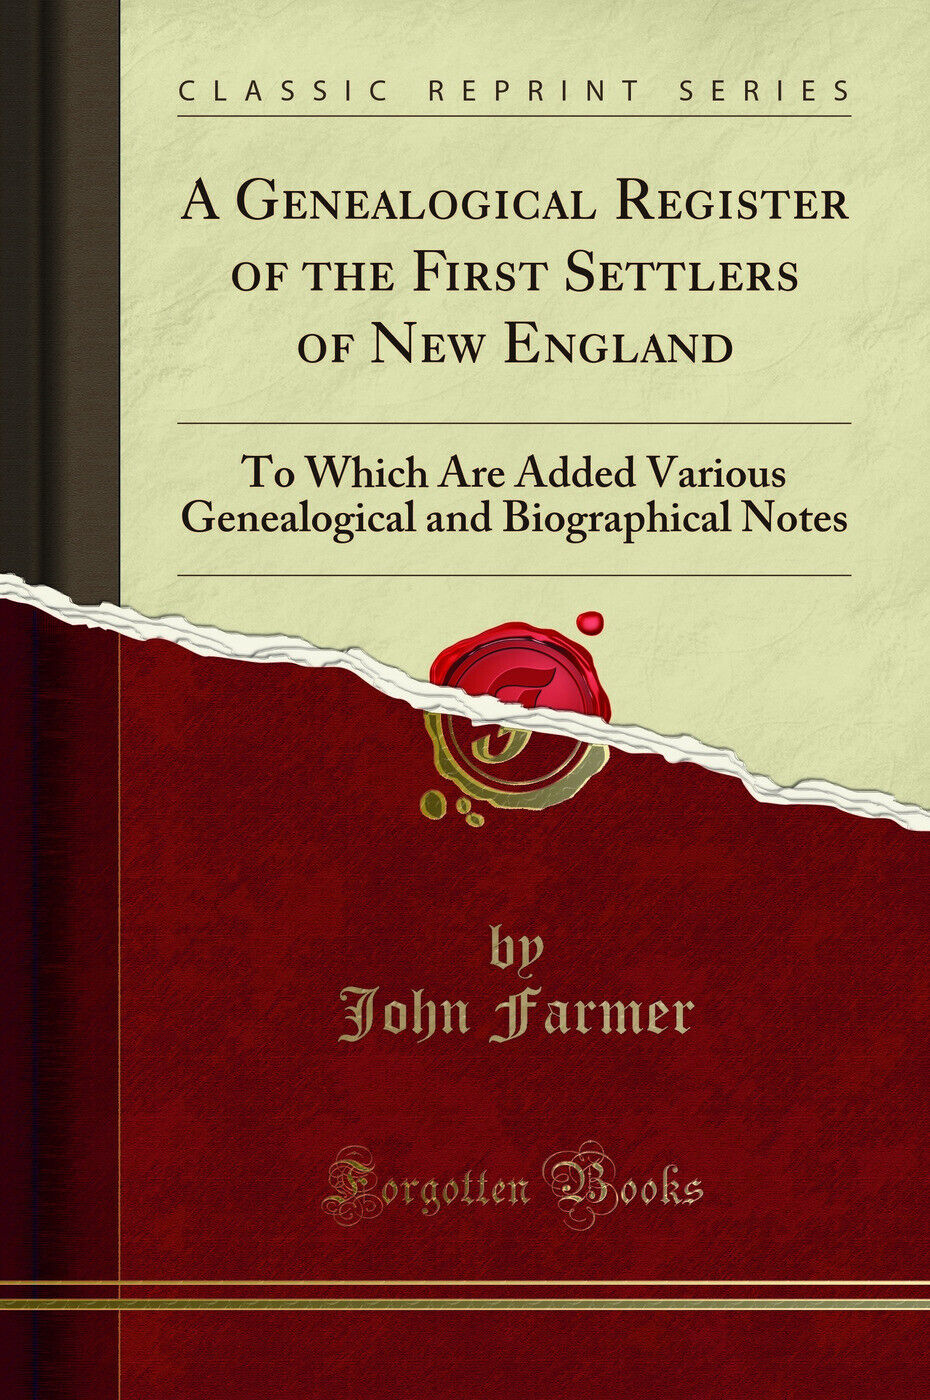 A Genealogical Register of the First Settlers of New England (Classic Reprint)